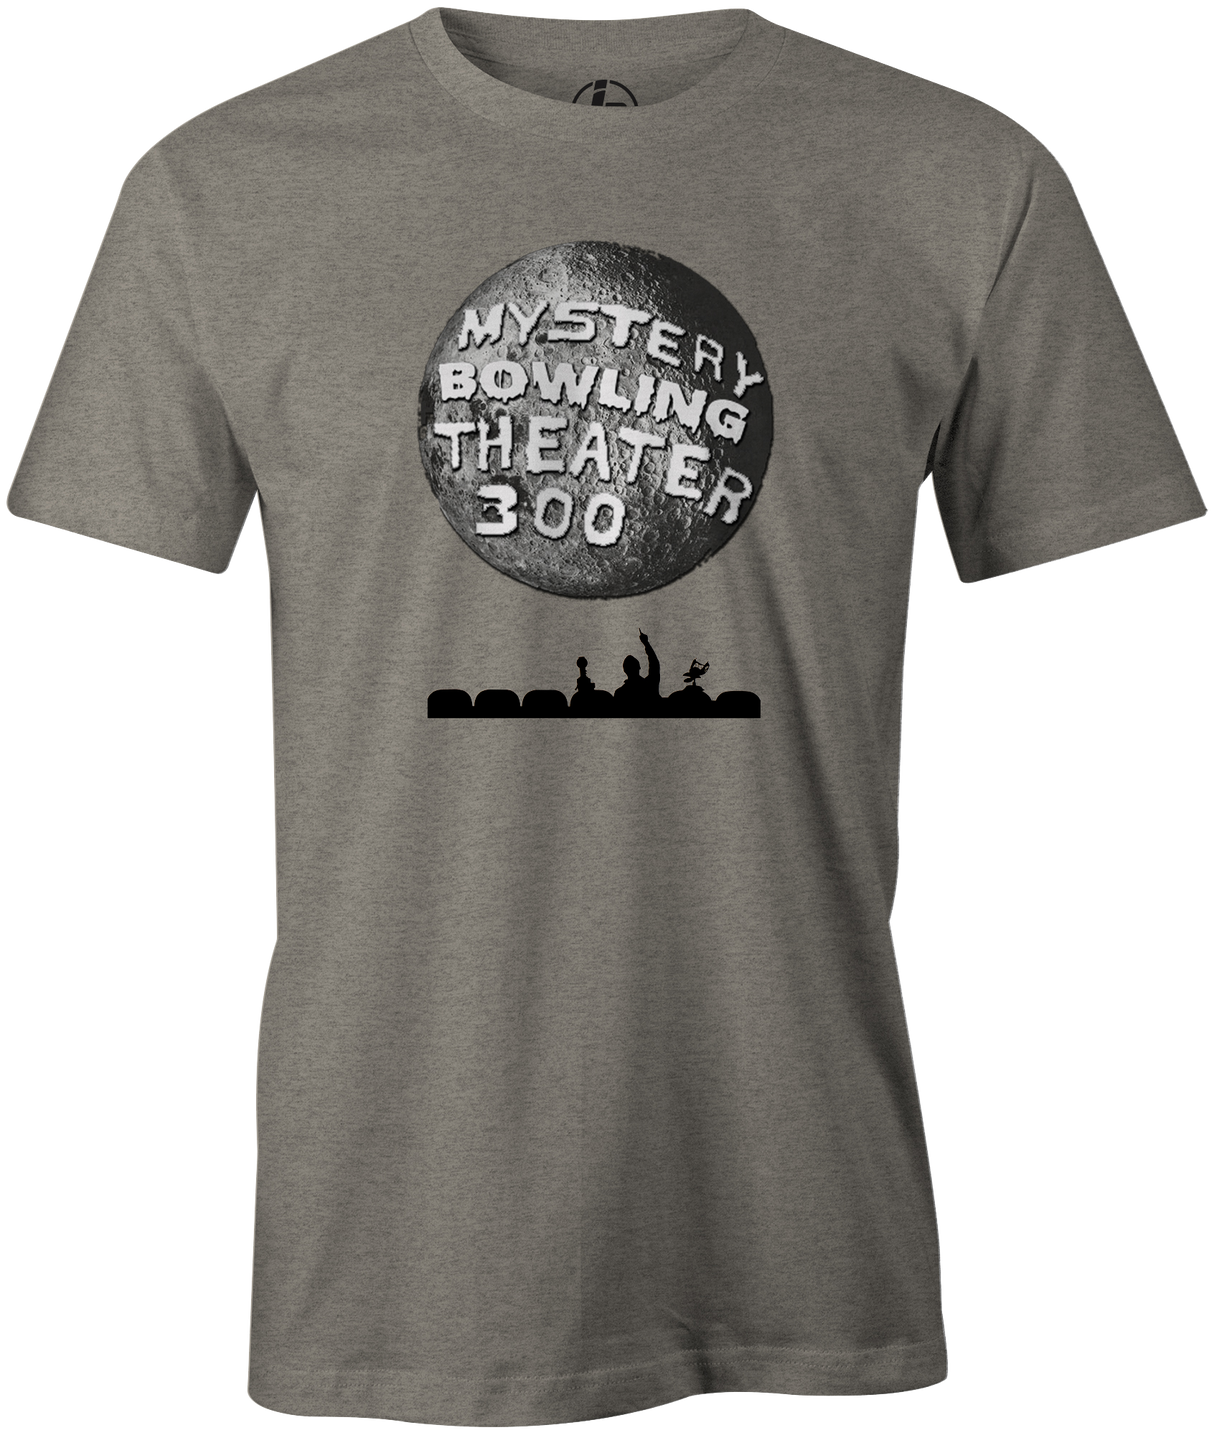 Remember the late 80's and early 90's? We know not all of you will understand the significance of this shirt, but our staff loved this show. Critique your teammates on the lanes with this "Mystery Bowling Theater 300" tee!